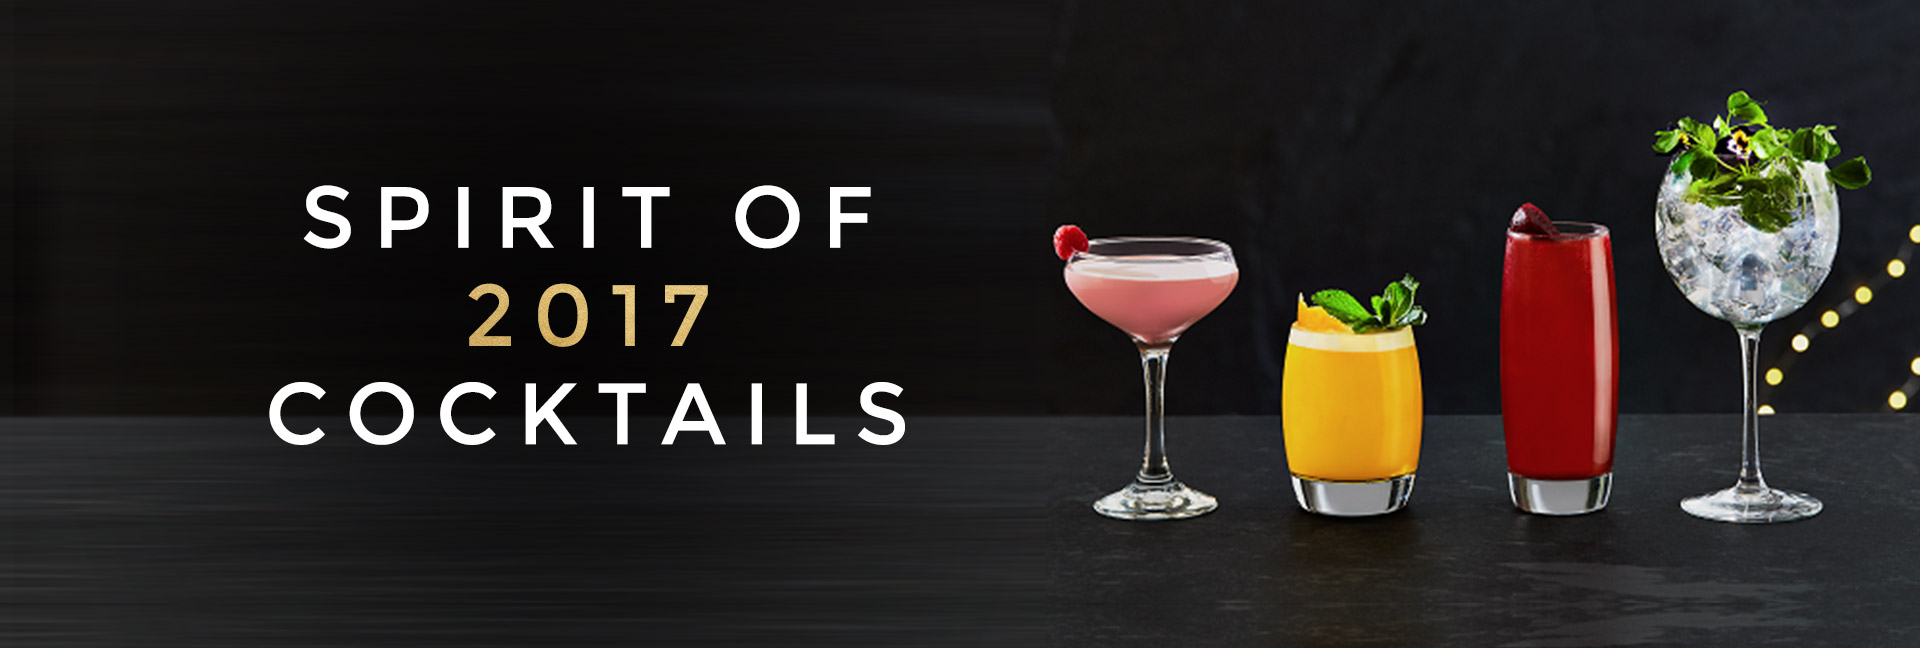 Spirit of 2017 cocktails at All Bar One Portsmouth